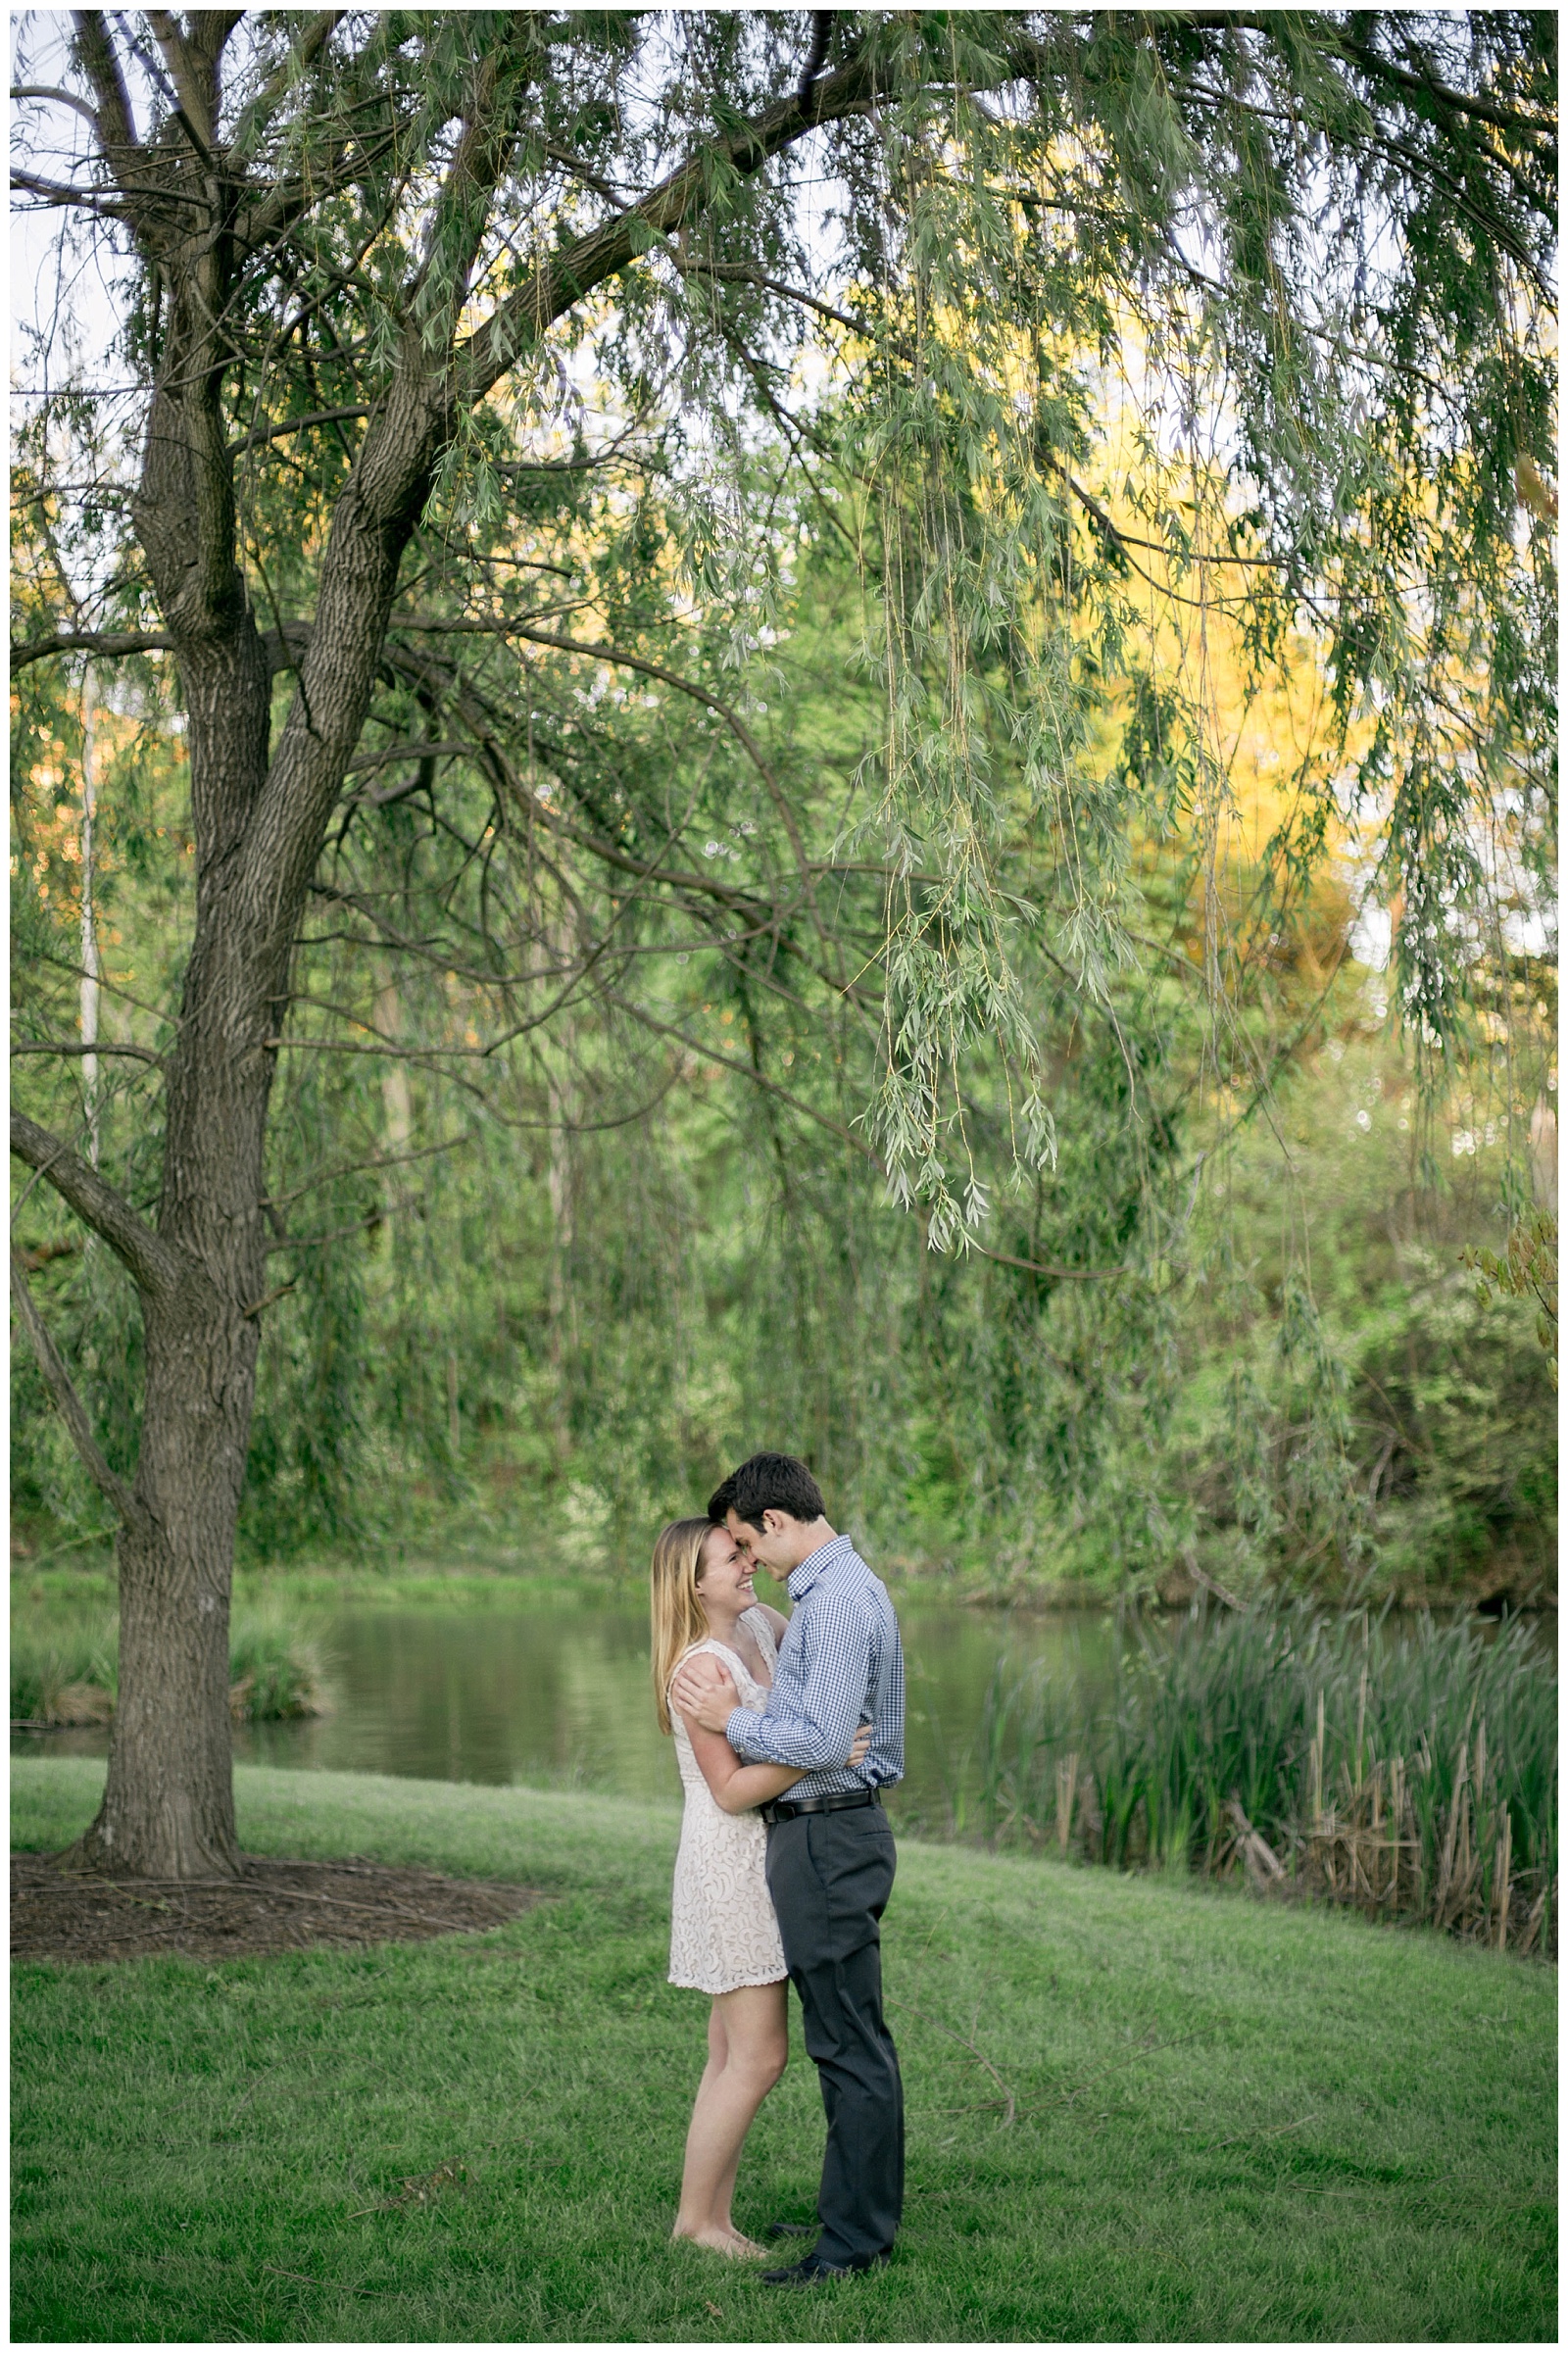 Oxford Engagement Session, Miami University | Monica Brown Photography | monicabrownphoto.com